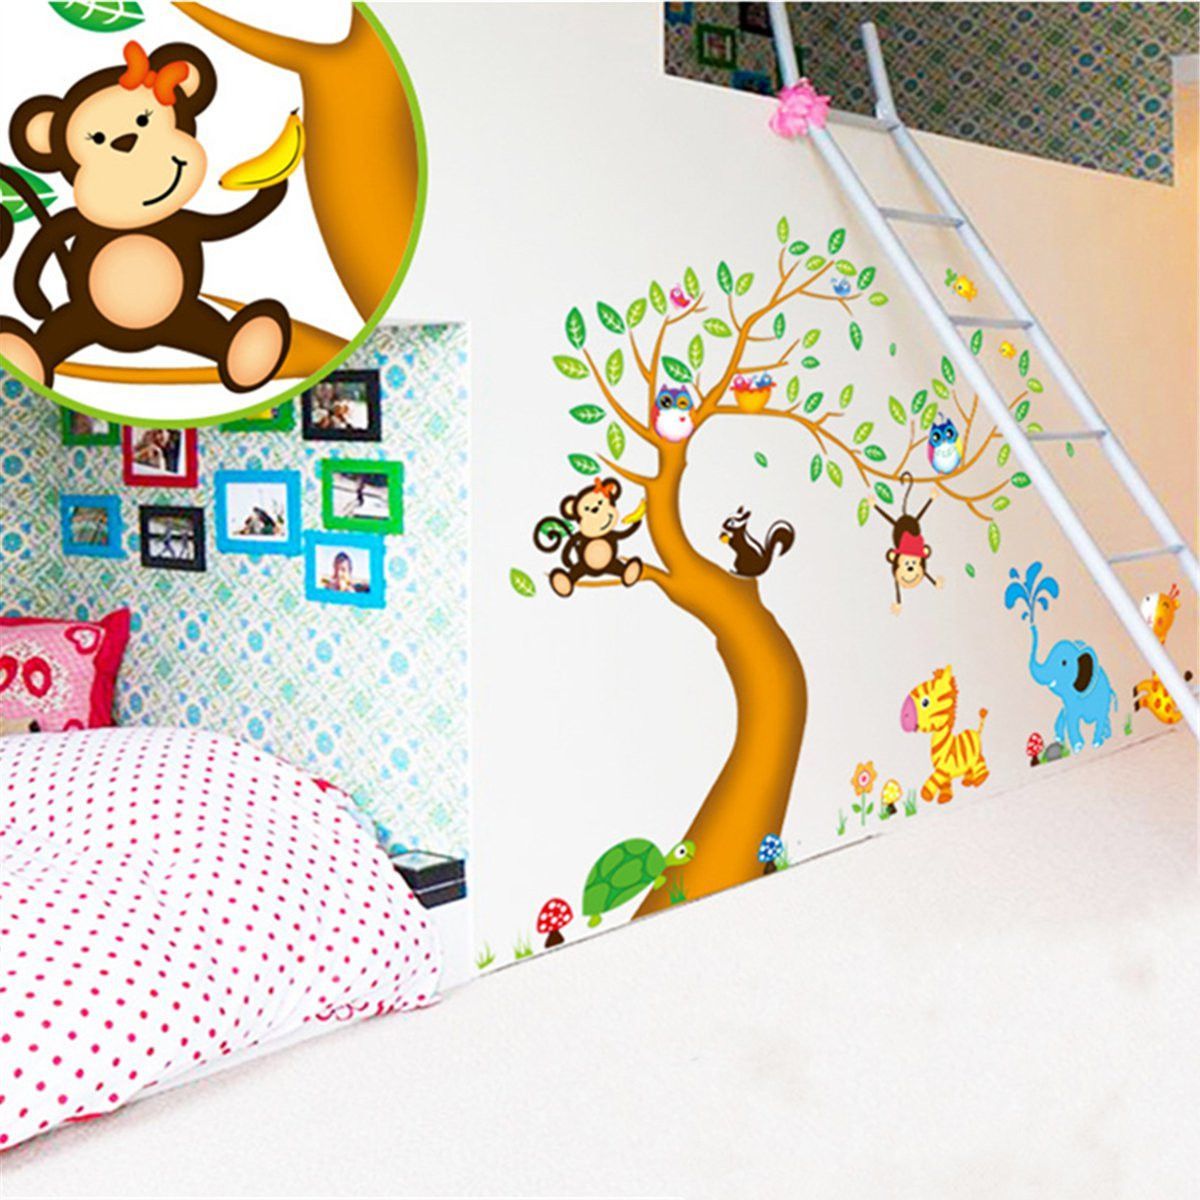 Removable-Jungle-Animals-Wall-Sticker-Monkey-Owl-Tree-Decal-Nursery-Room-Decorations-1458519